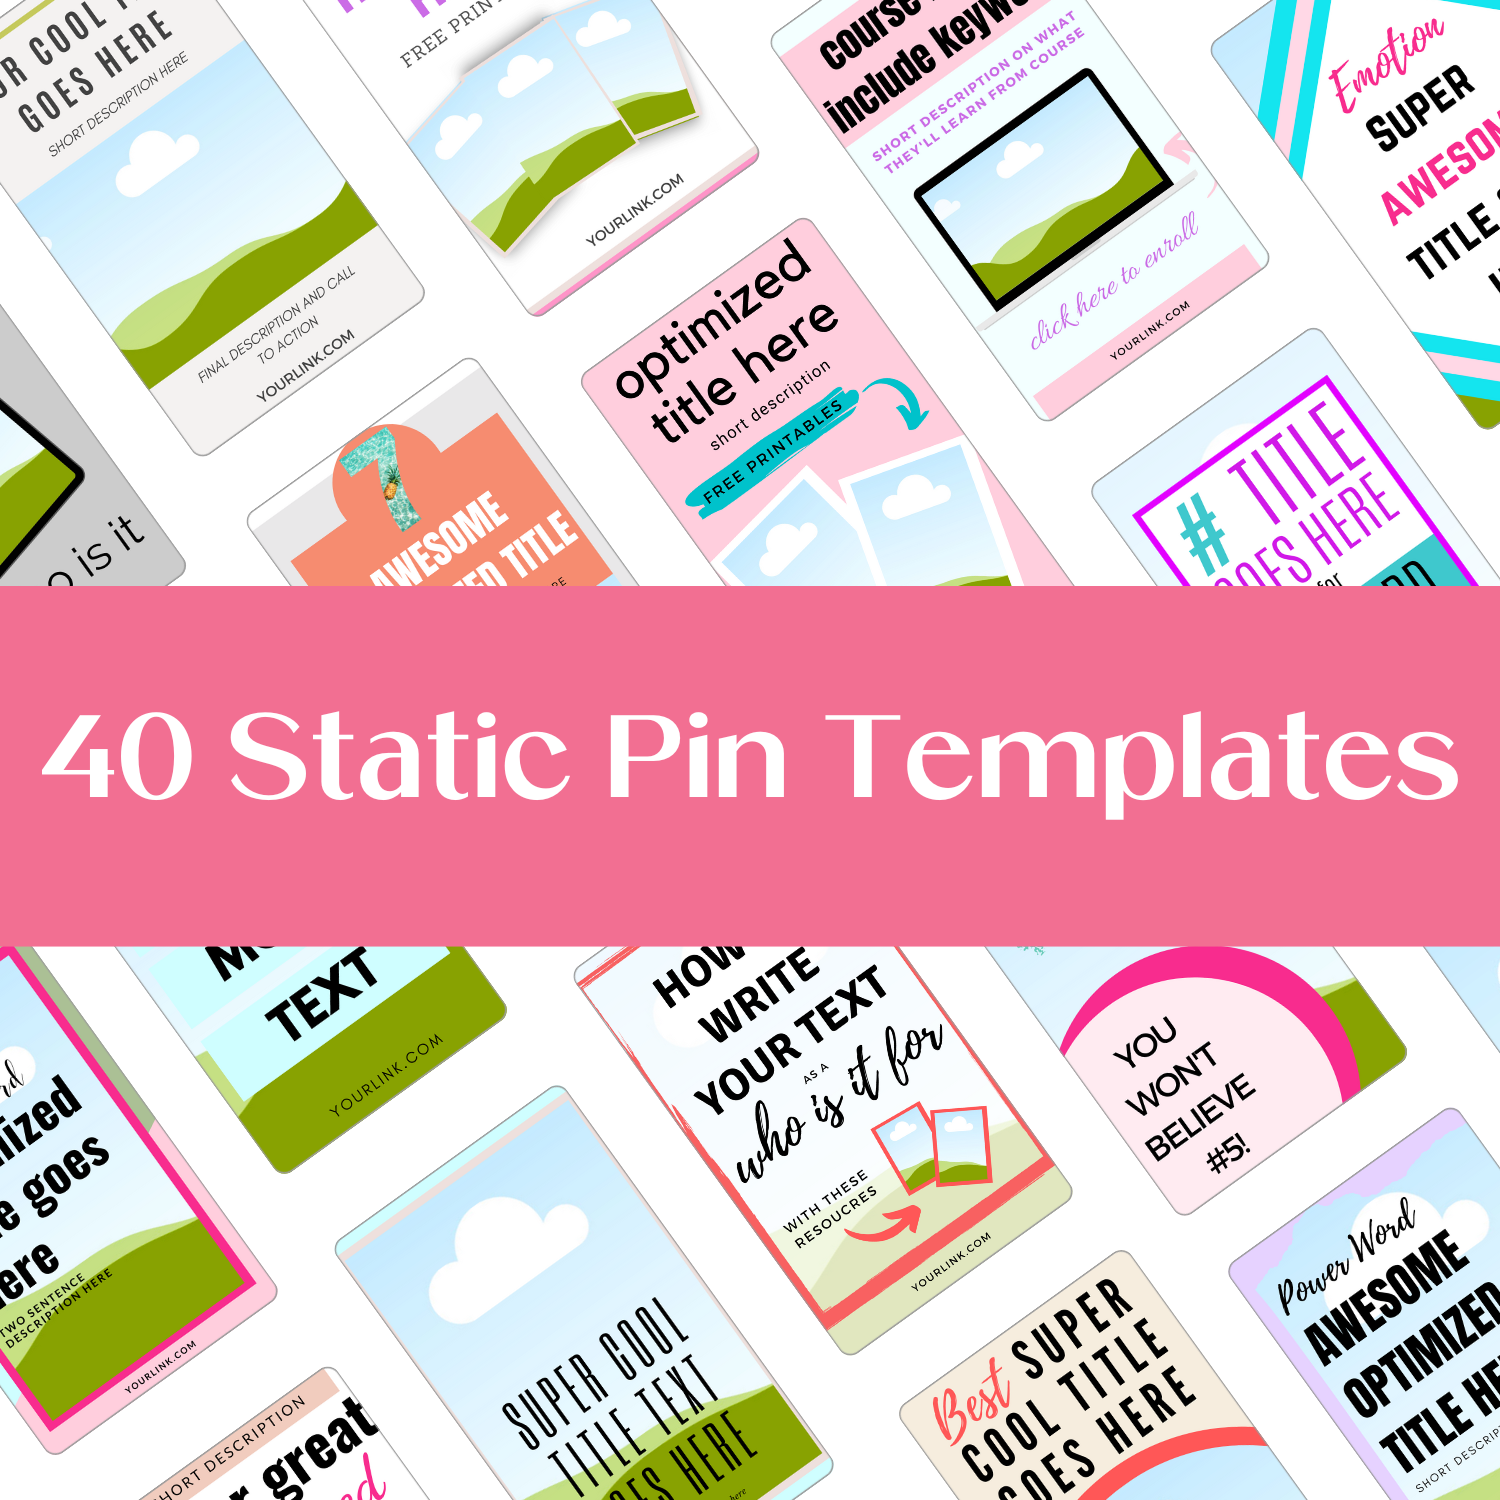 A grid mockup displaying the different Canva Pin templates designs.